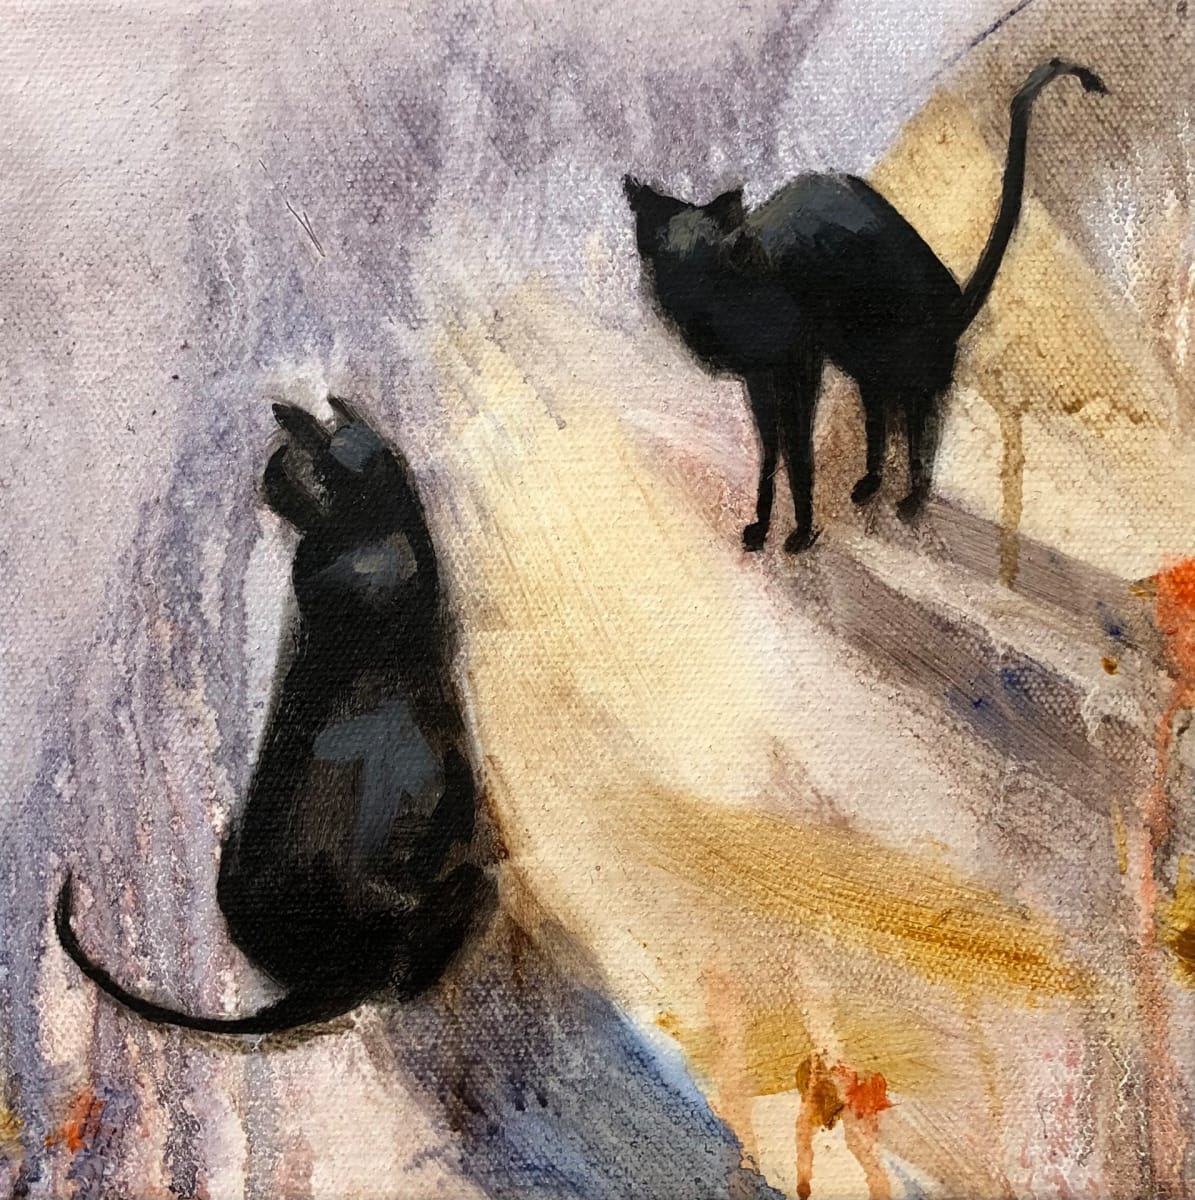 Cats by Cary Galbraith  Image:  
Cat on the right, is caught by surprise, raising its back in defense.
 
Cat on the left knows, it’s got the advantage.